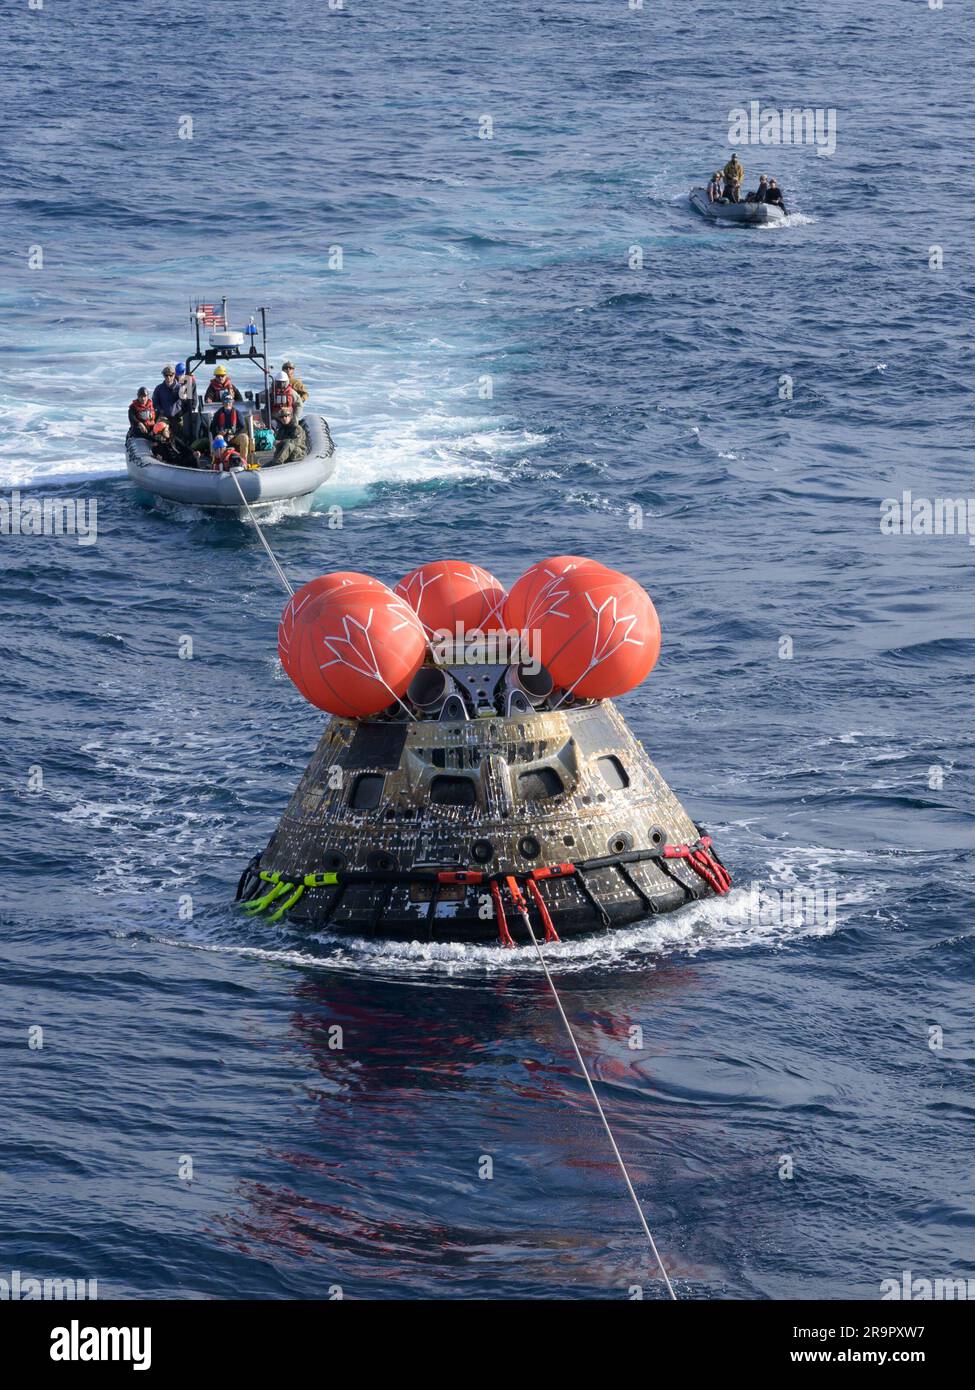 Orion Recovery. After splashing down at 12:40 p.m. EST on Dec. 11, 2022, U.S. Navy divers help recover the Orion Spacecraft for the Artemis I mission. NASA, the Navy and other Department of Defense partners worked together to secure the spacecraft inside the well deck of USS Portland approximately five hours after Orion splashed down in the Pacific Ocean off the coast of California. Stock Photo